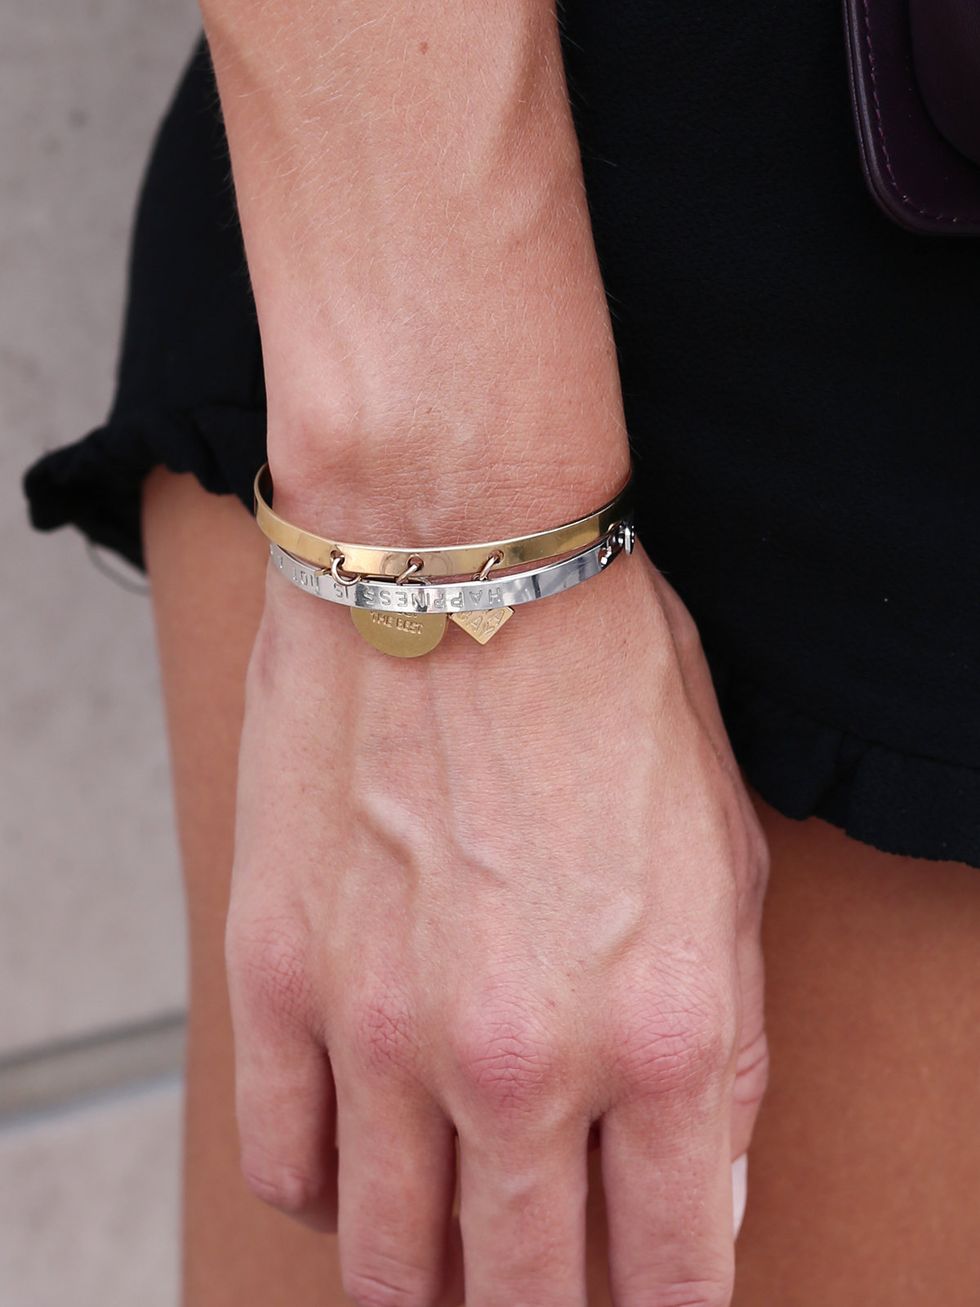 Finger, Brown, Wrist, Joint, Style, Fashion accessory, Jewellery, Tan, Body jewelry, Nail, 